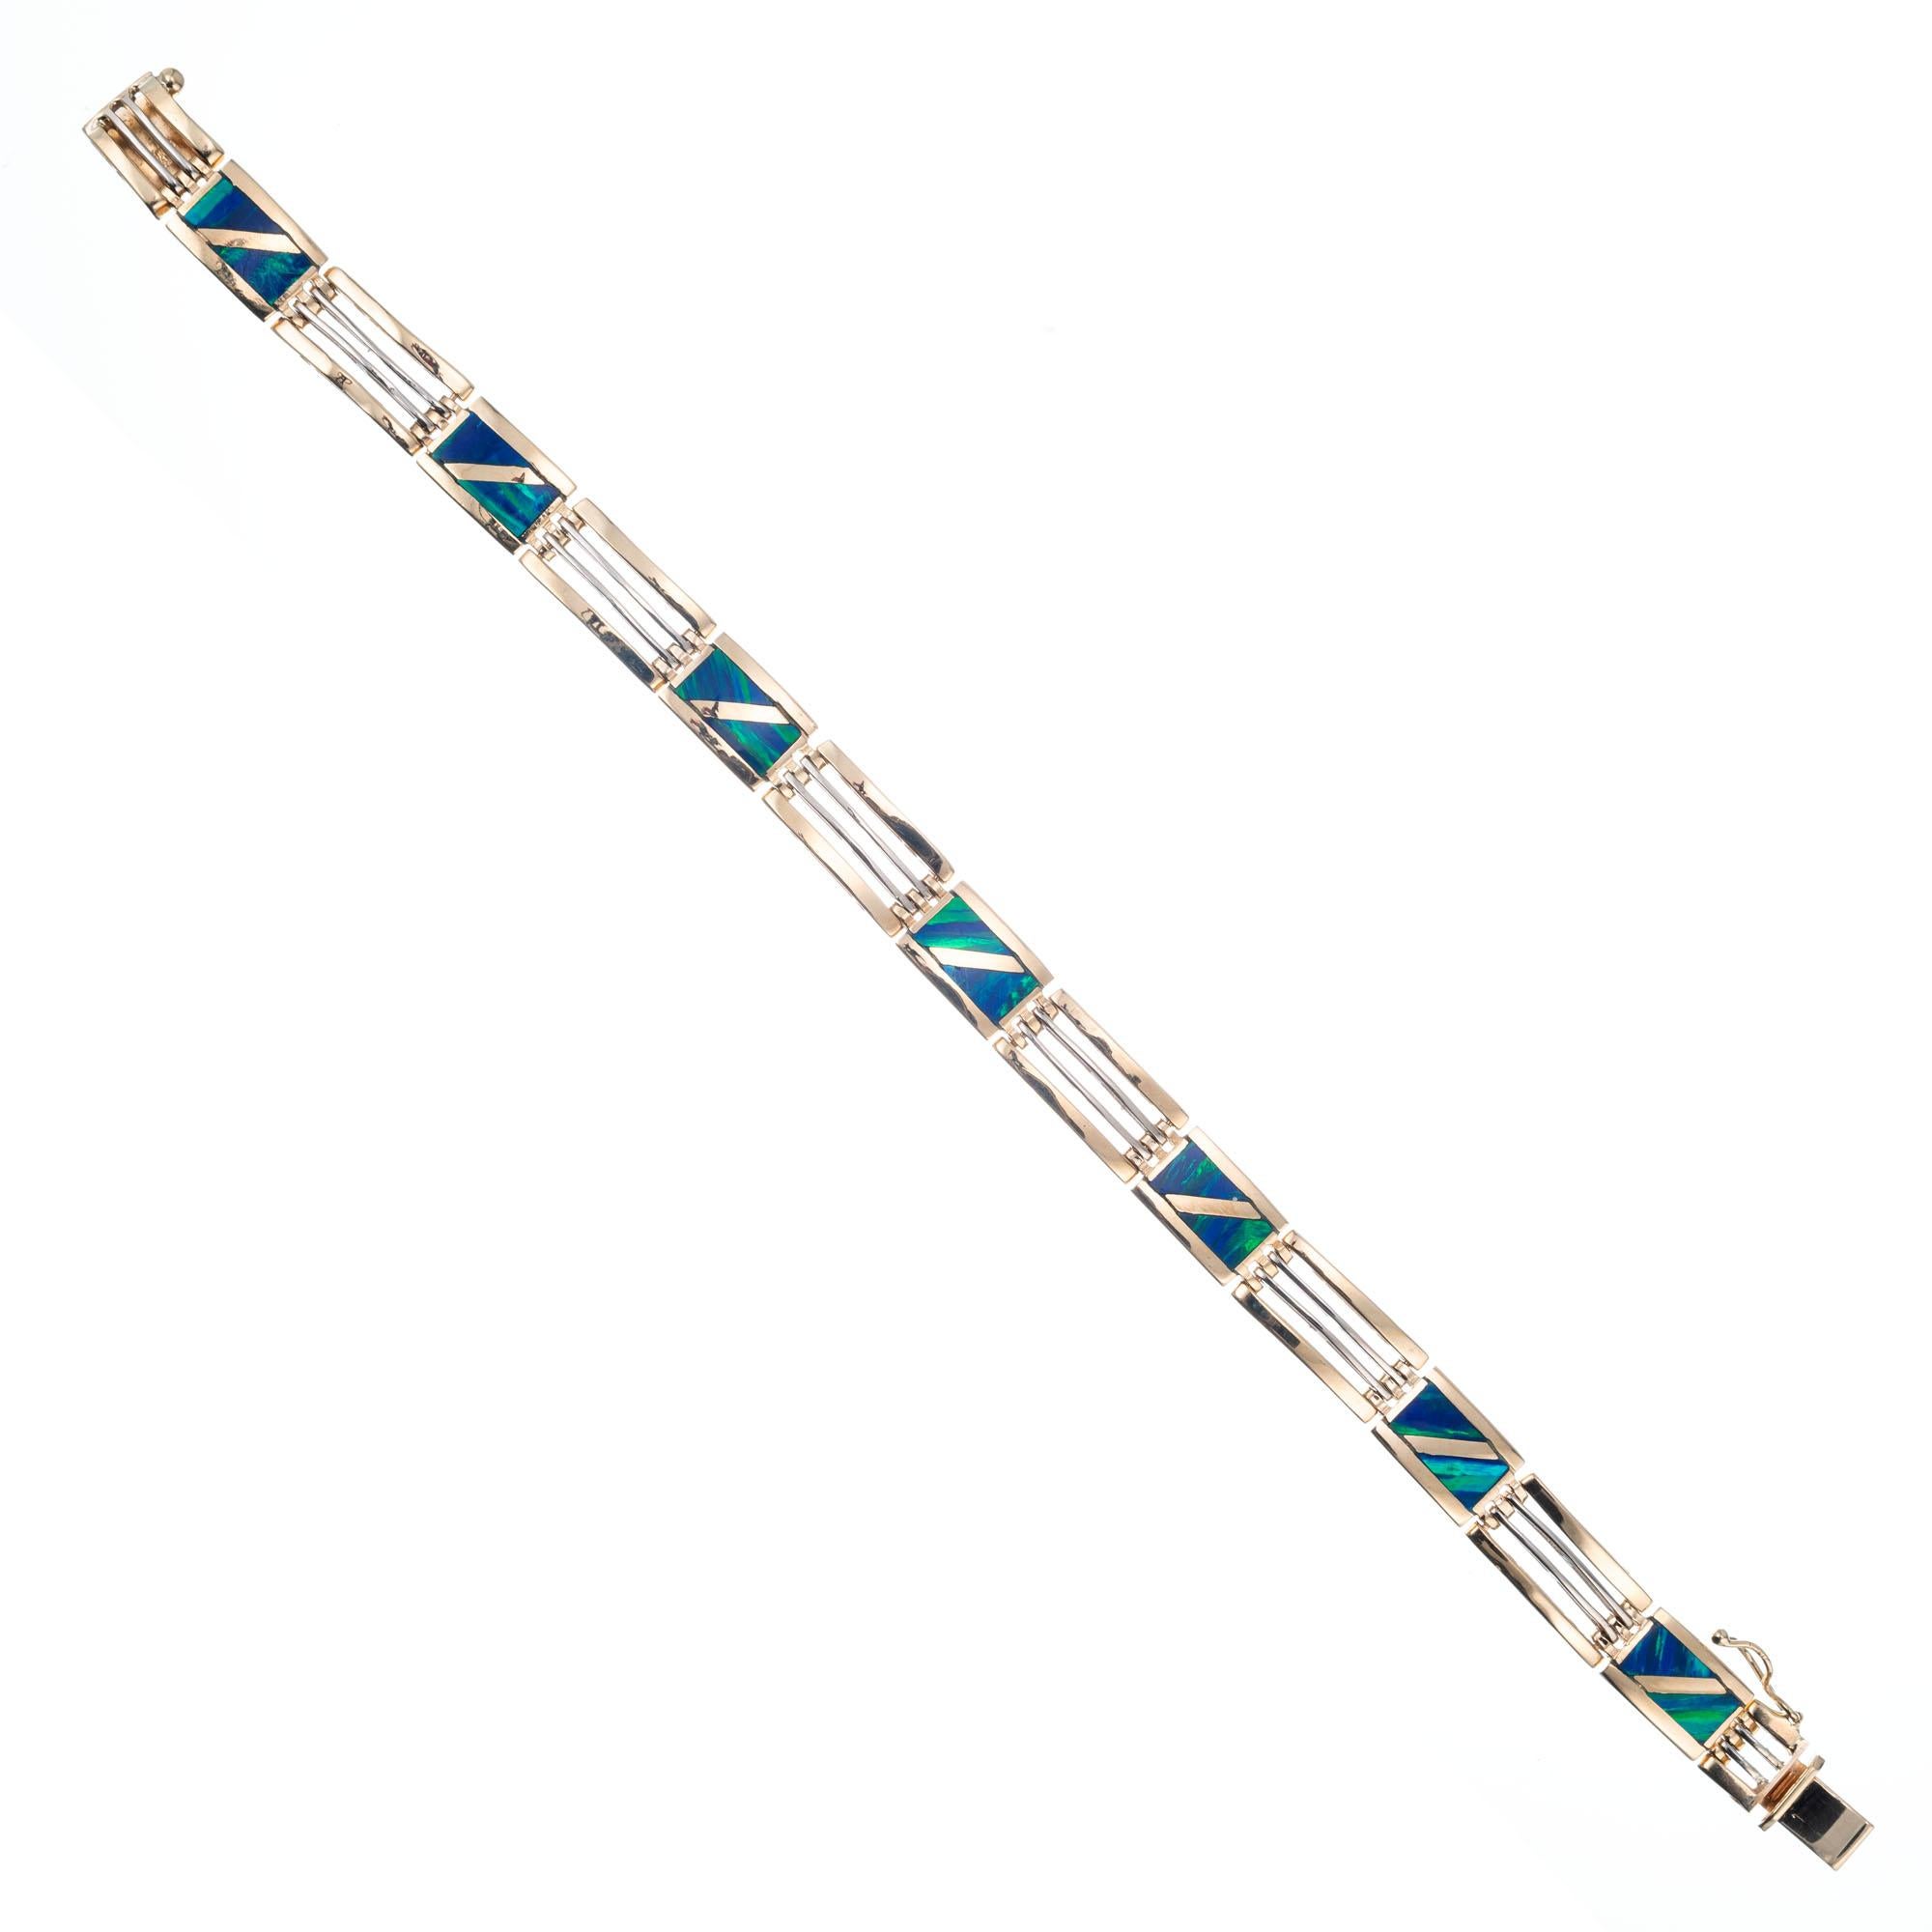 1970's Opal inlay square Link bracelet in 14k yellow and white gold. 8.25 length

14 triangular opal slices 
14k yellow gold 
14k white gold
Stamped: 14k
27.4 grams
Bracelet: 8.25 Inches
Width: 8.47mm
Depth: 3.36mm

